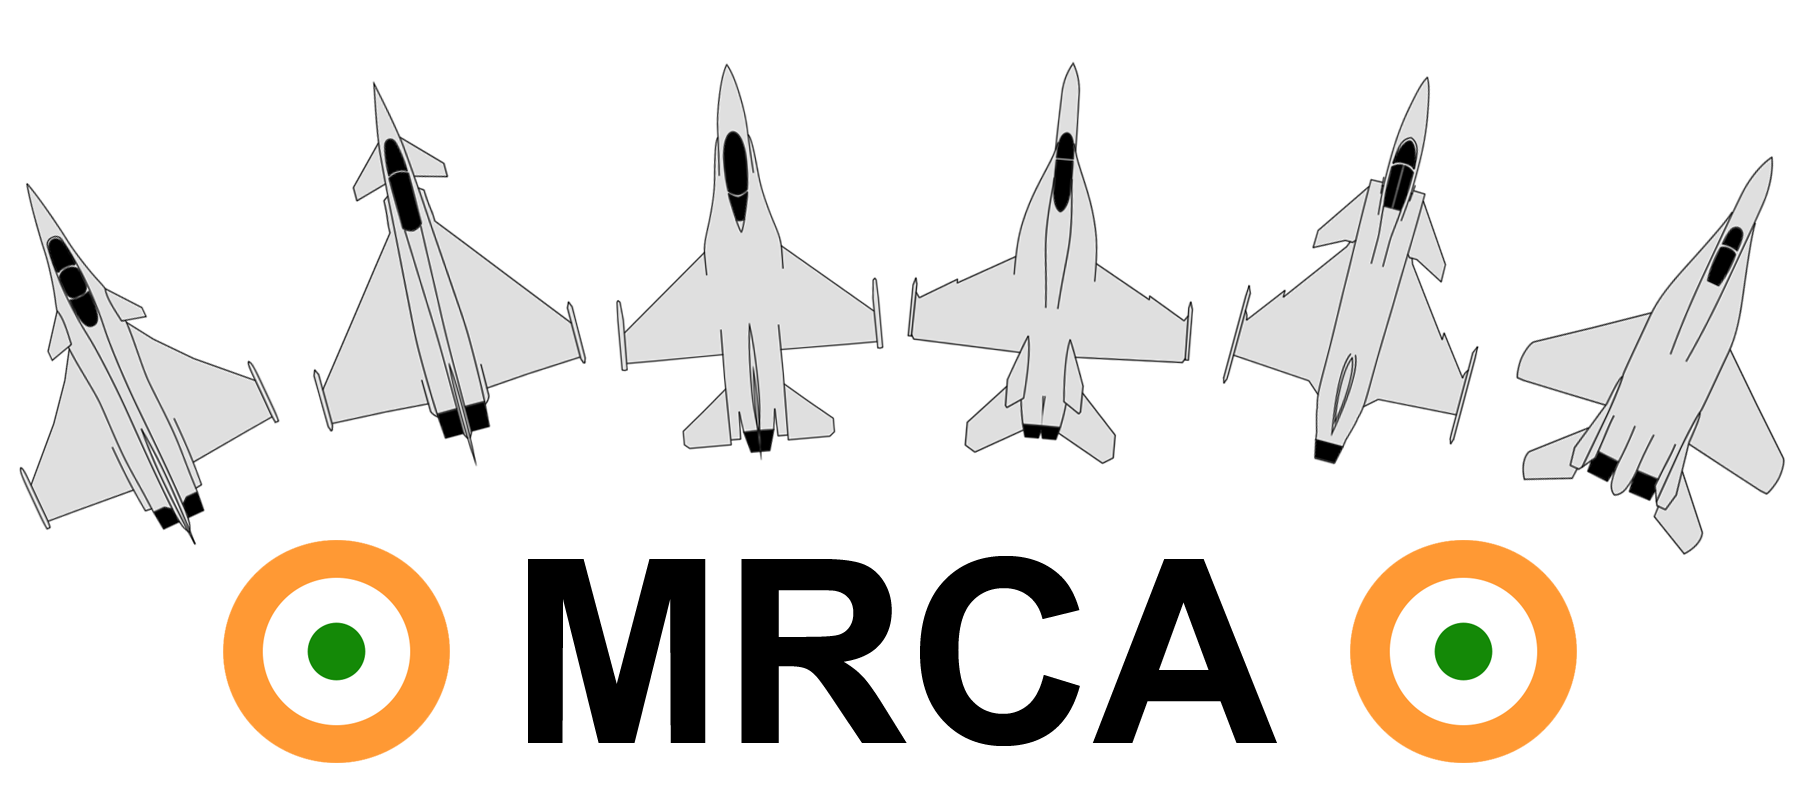 File:India MRCA-6.png - Wikimedia Commons